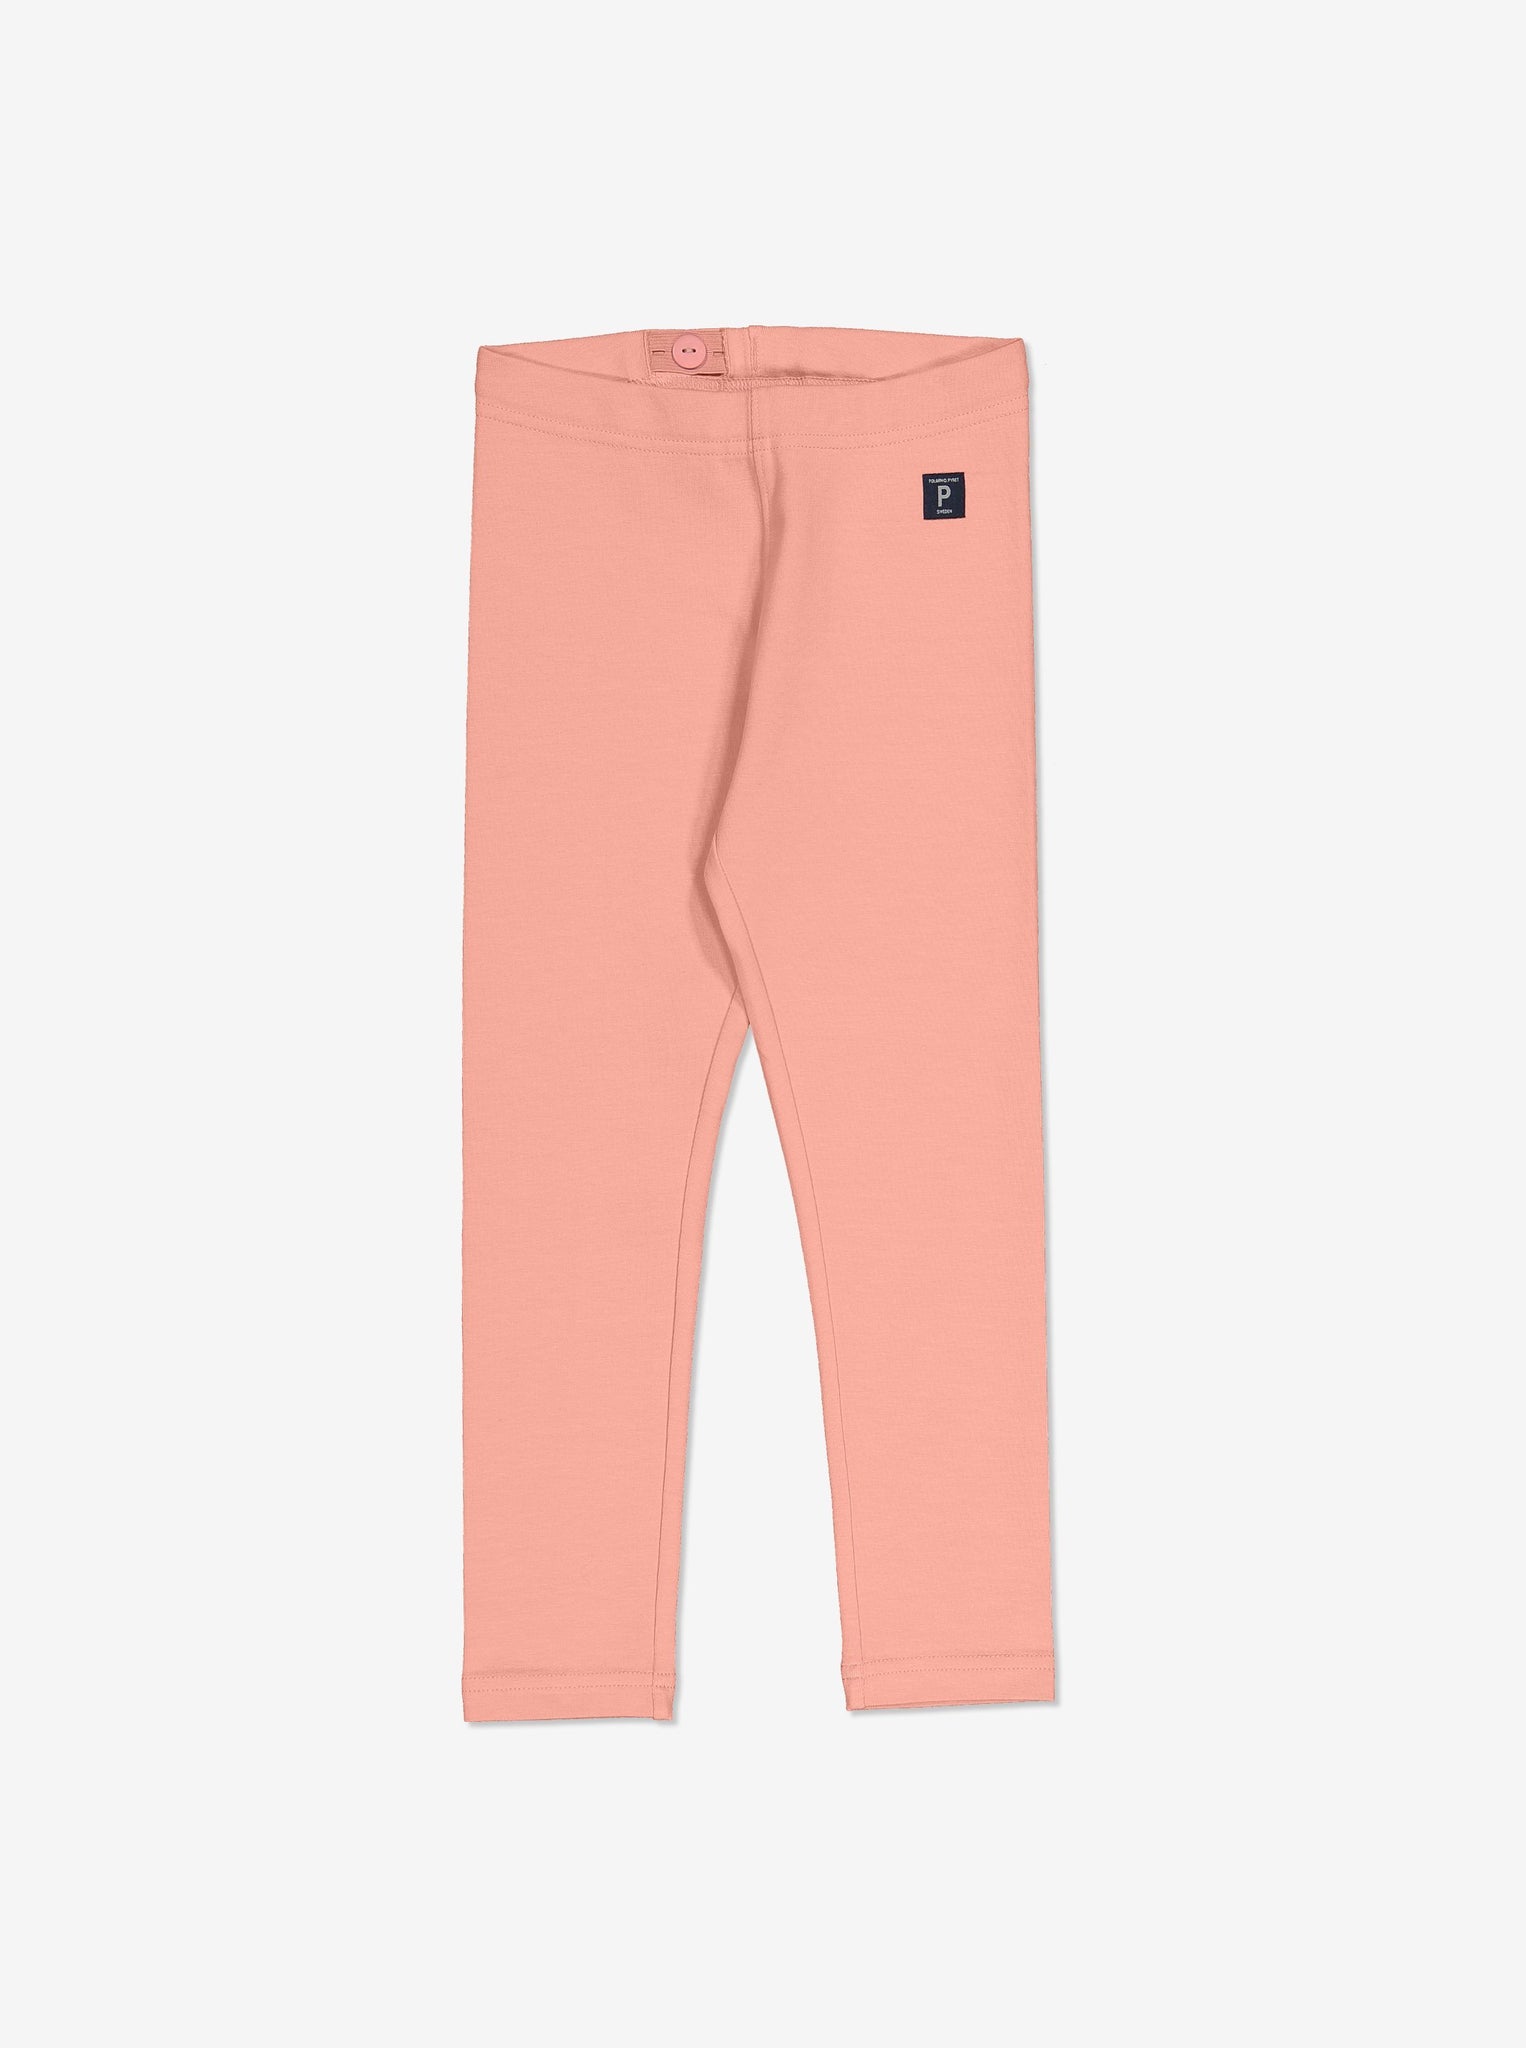 Kids leggings in pink made from organic cotton that has an adjustable waist so they always fit perfectly.